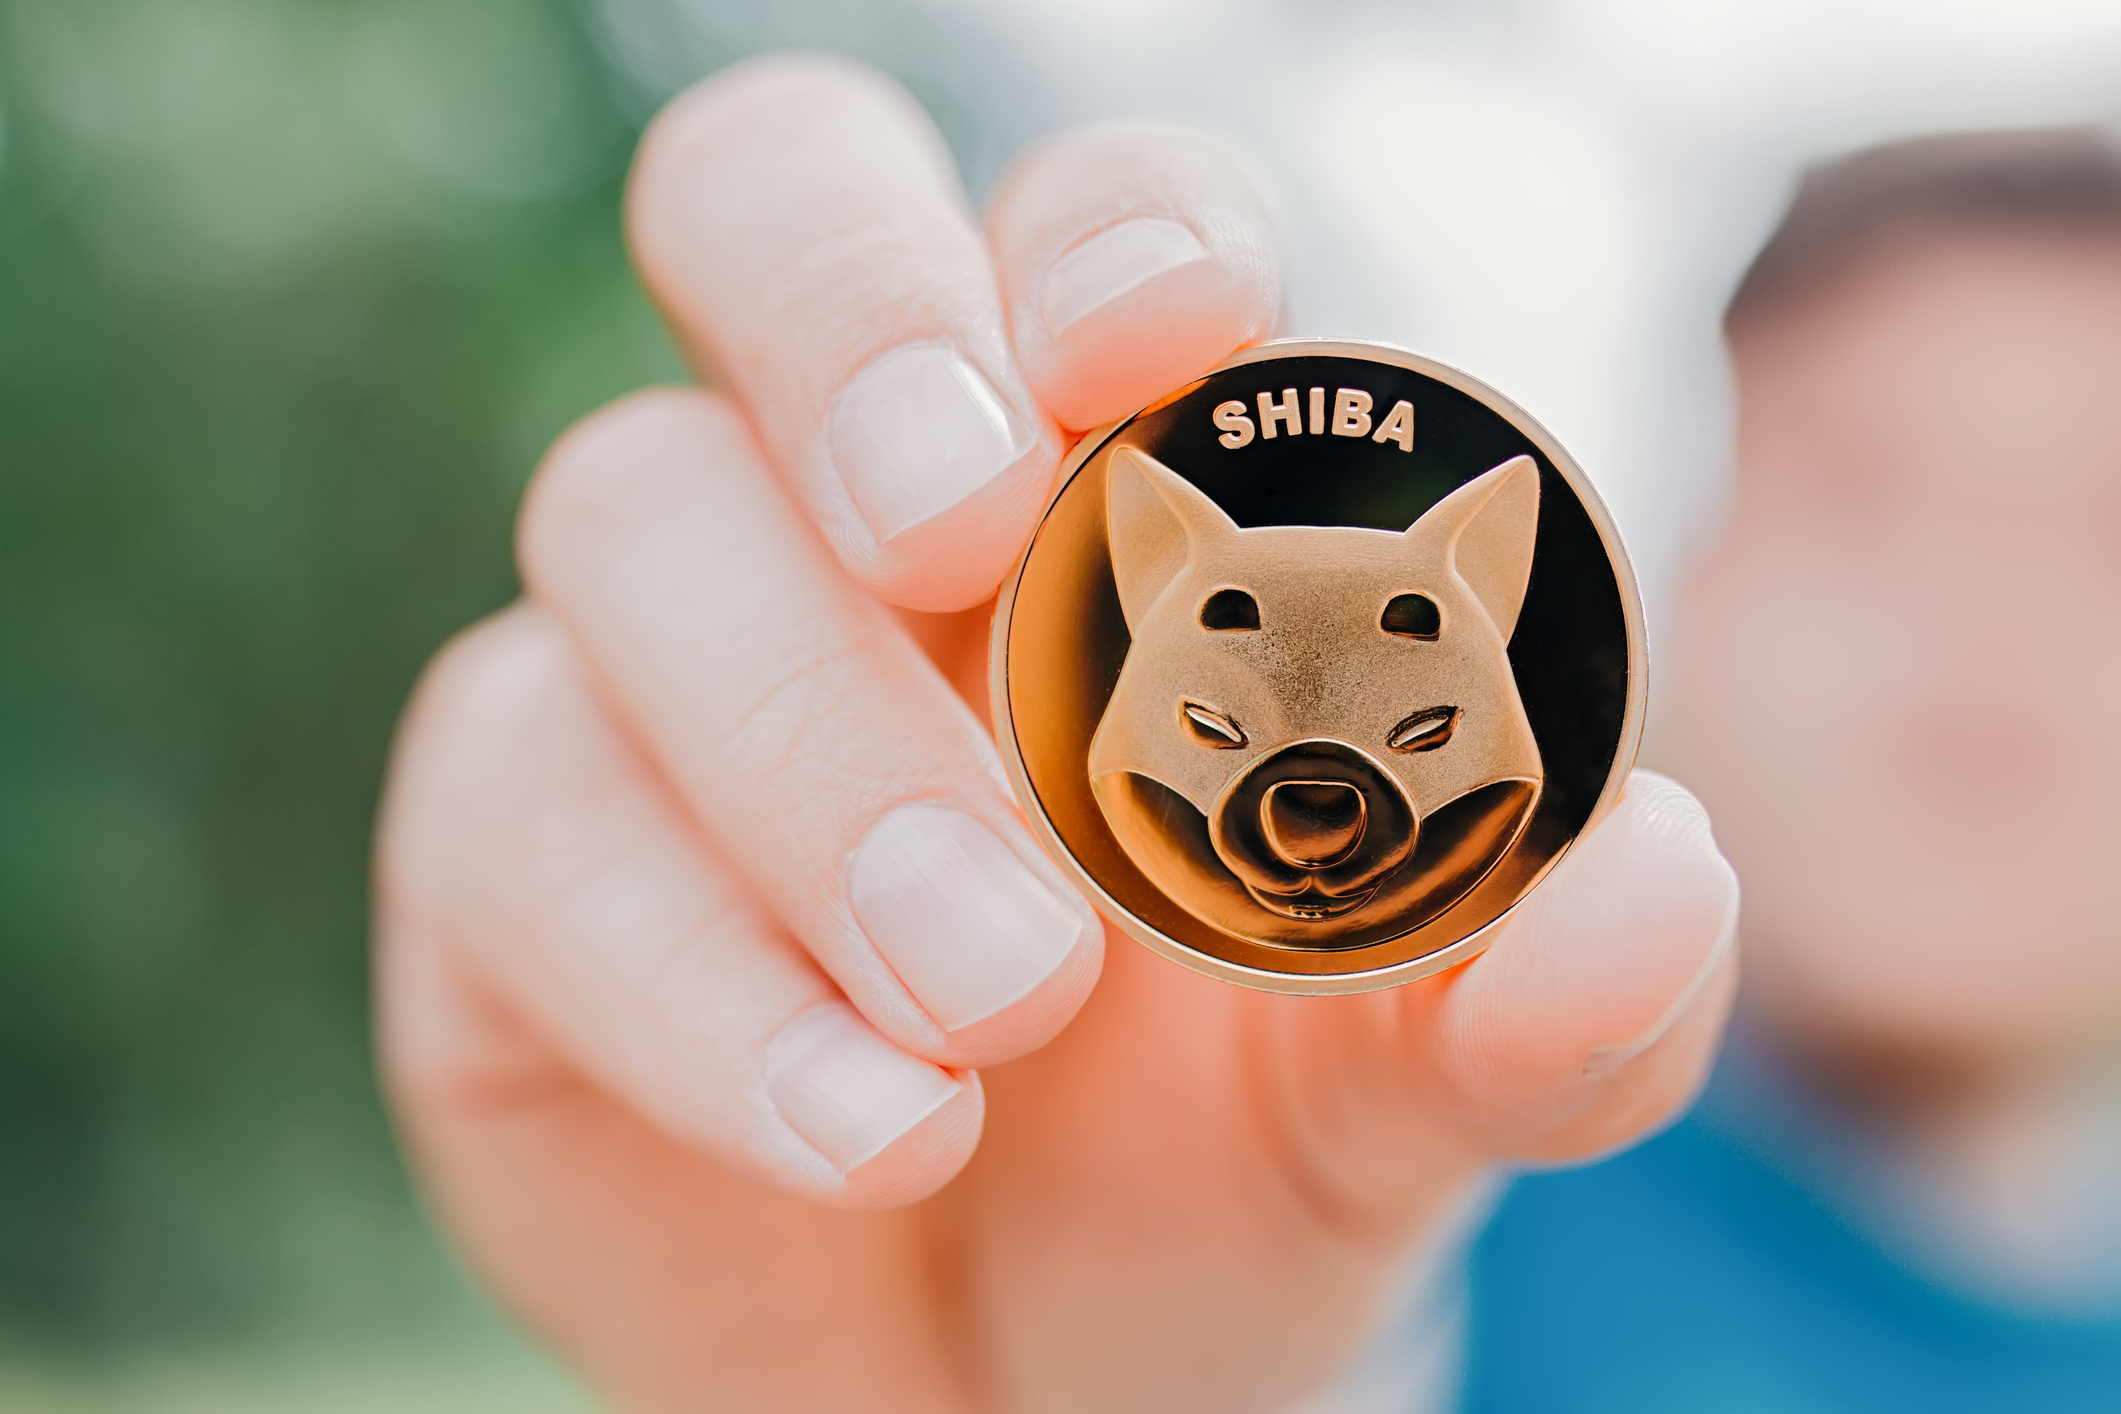 Shiba Inu Shibarium Faces Technical Glitch: Network Outage Hinders User Experience